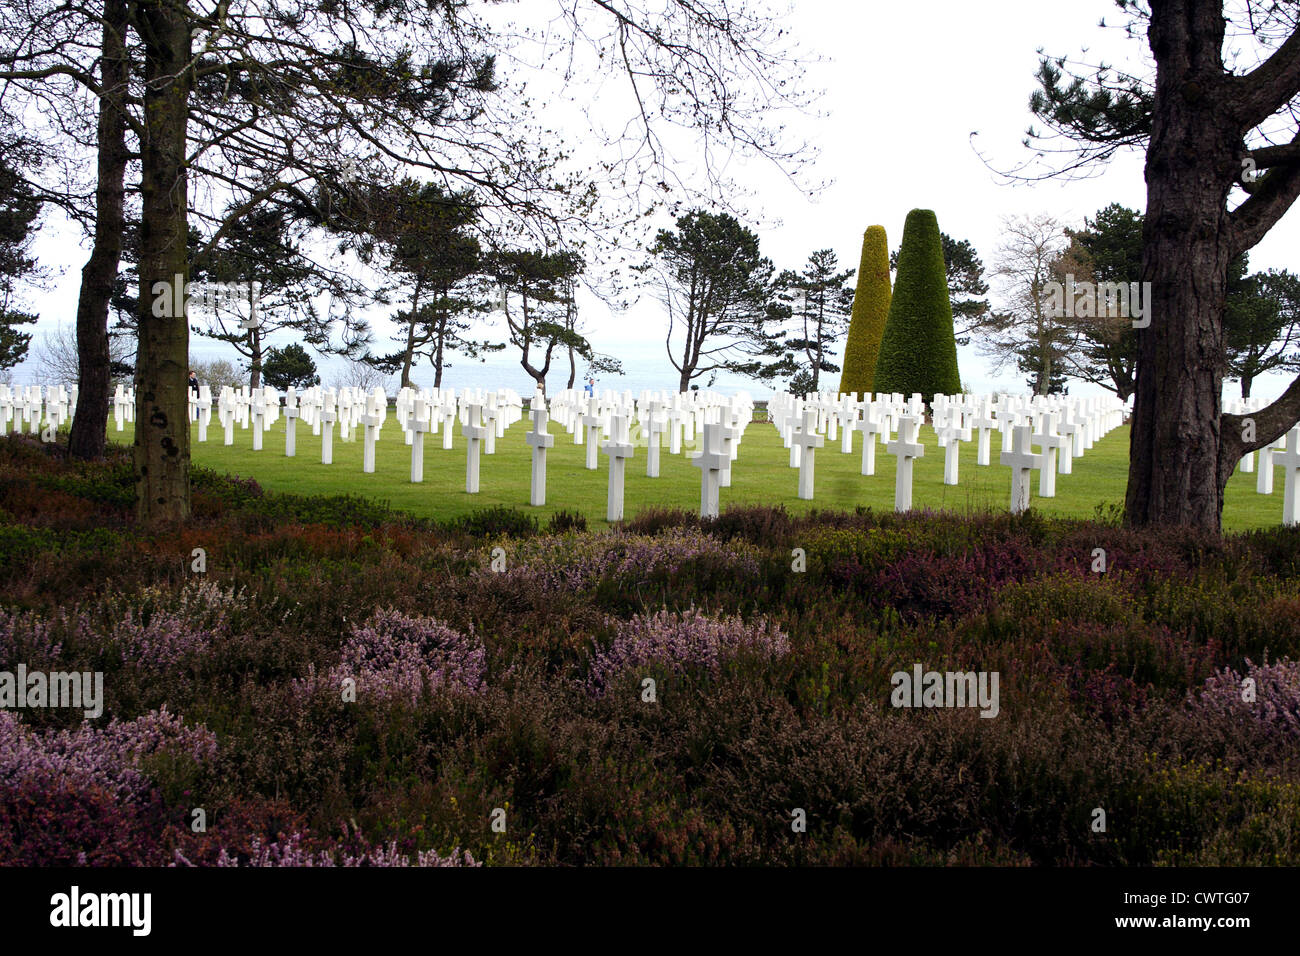 American cemetery for the Normandy landings in 1944, France Stock Photo